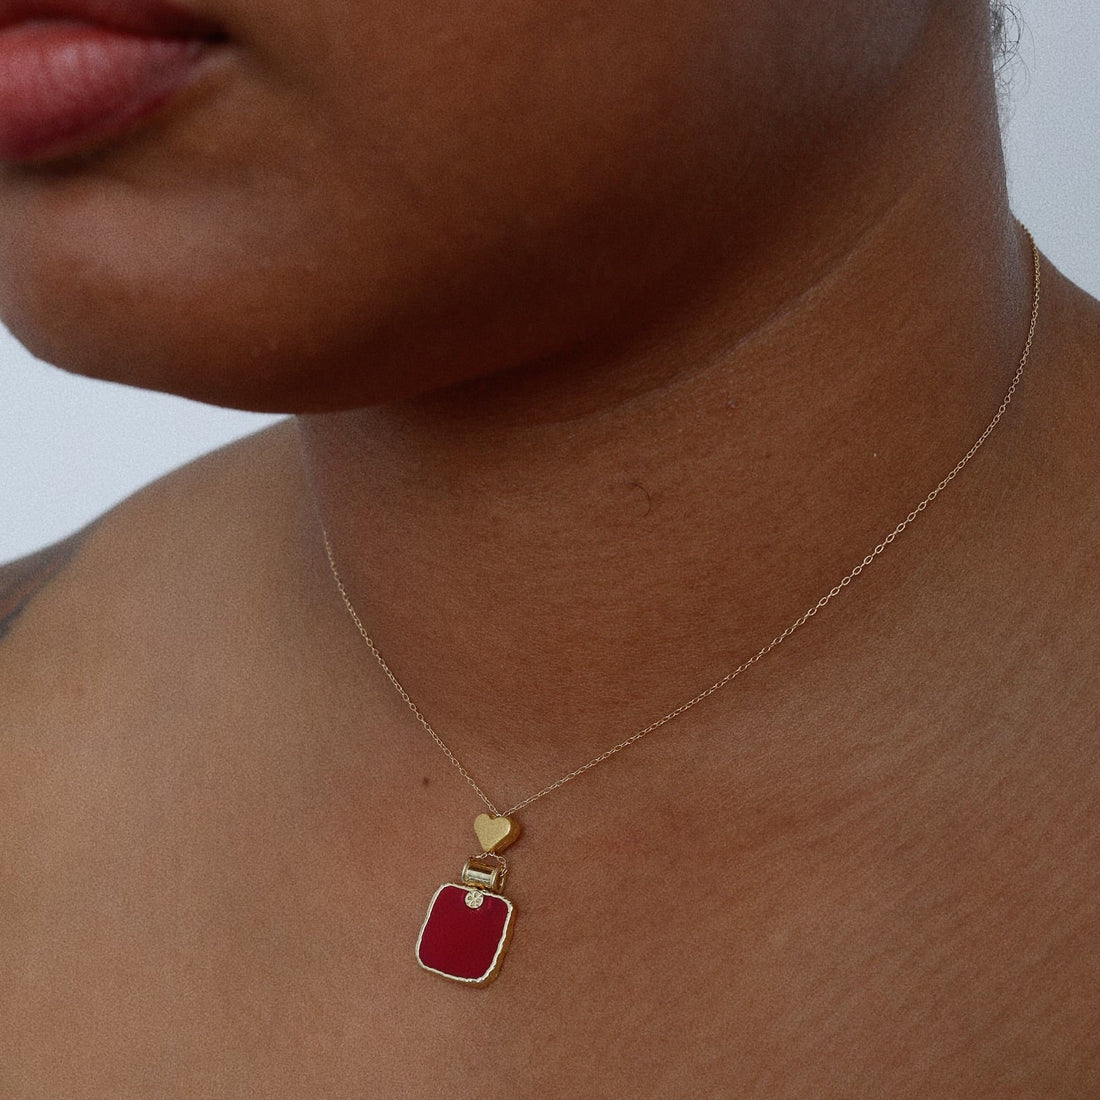 "The Relic" square gemstone pendant necklace - Chocolate and Steel